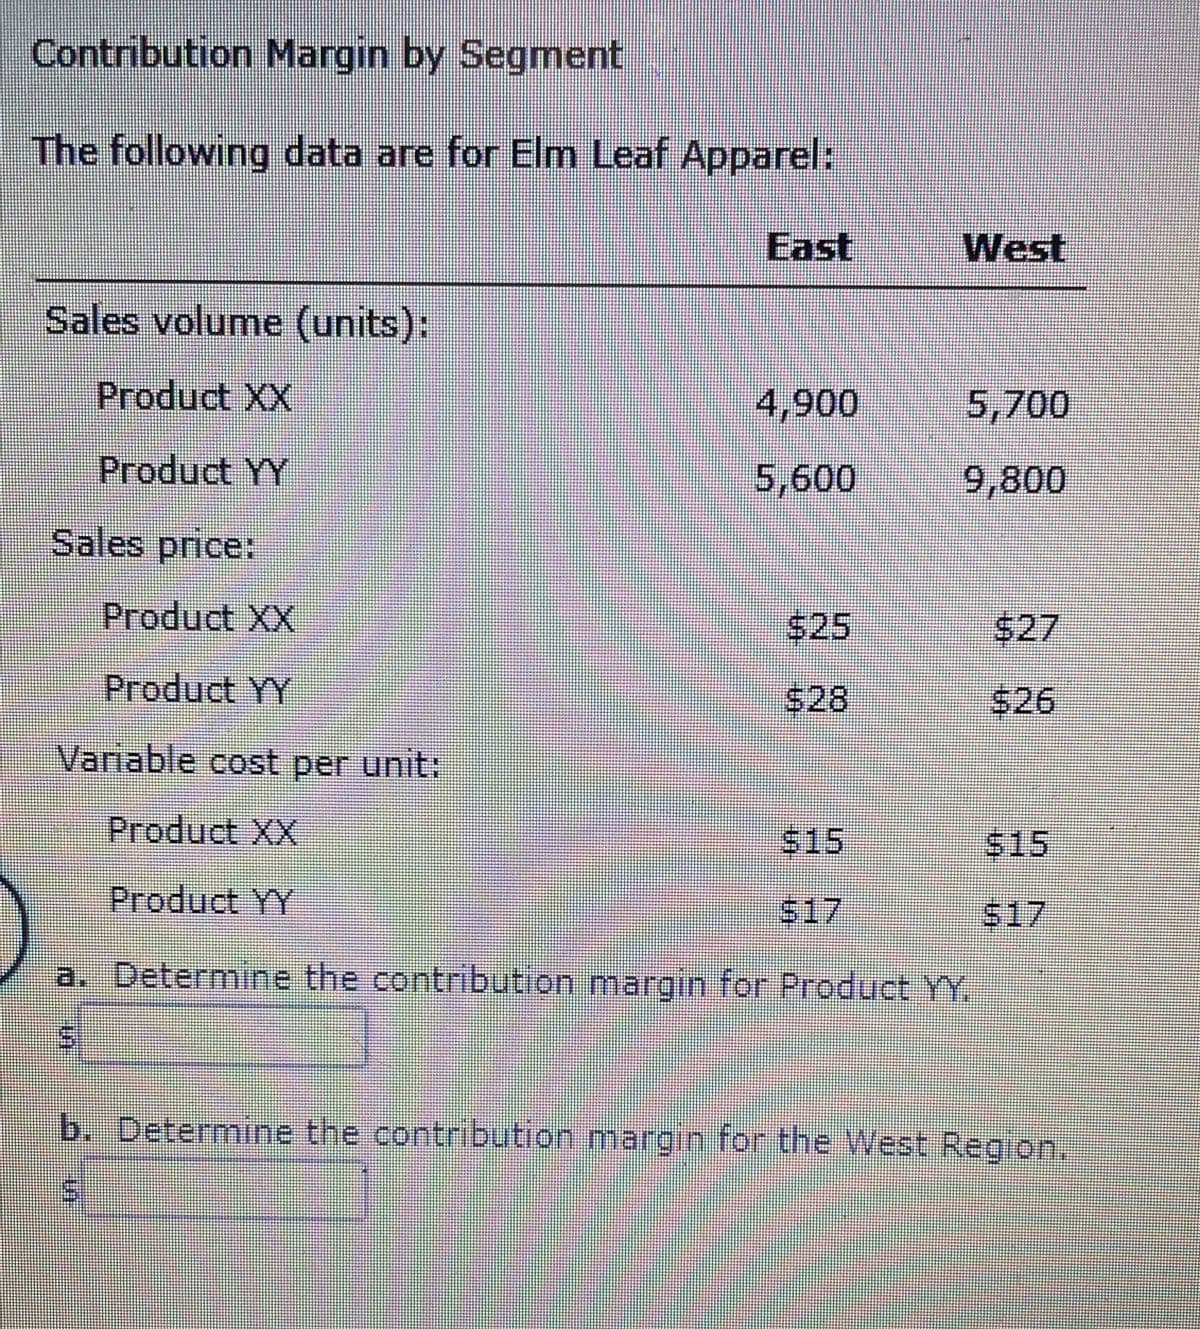 Contribution Margin by Segment
The following data are for Elm Leaf Apparel:
East
West
Sales volume (units):
Product XX
4,900
5,700
Product YY
5,600
9,800
Sales price:
Product XX
$25
$27
Product YY
$28
$26
Variable cost per unit:
Product XX
$15
515
Product YY
$17
517
a. Determine the contribution margin for Product YY.
b. Determine the contribution margin for the West Region.
%24
